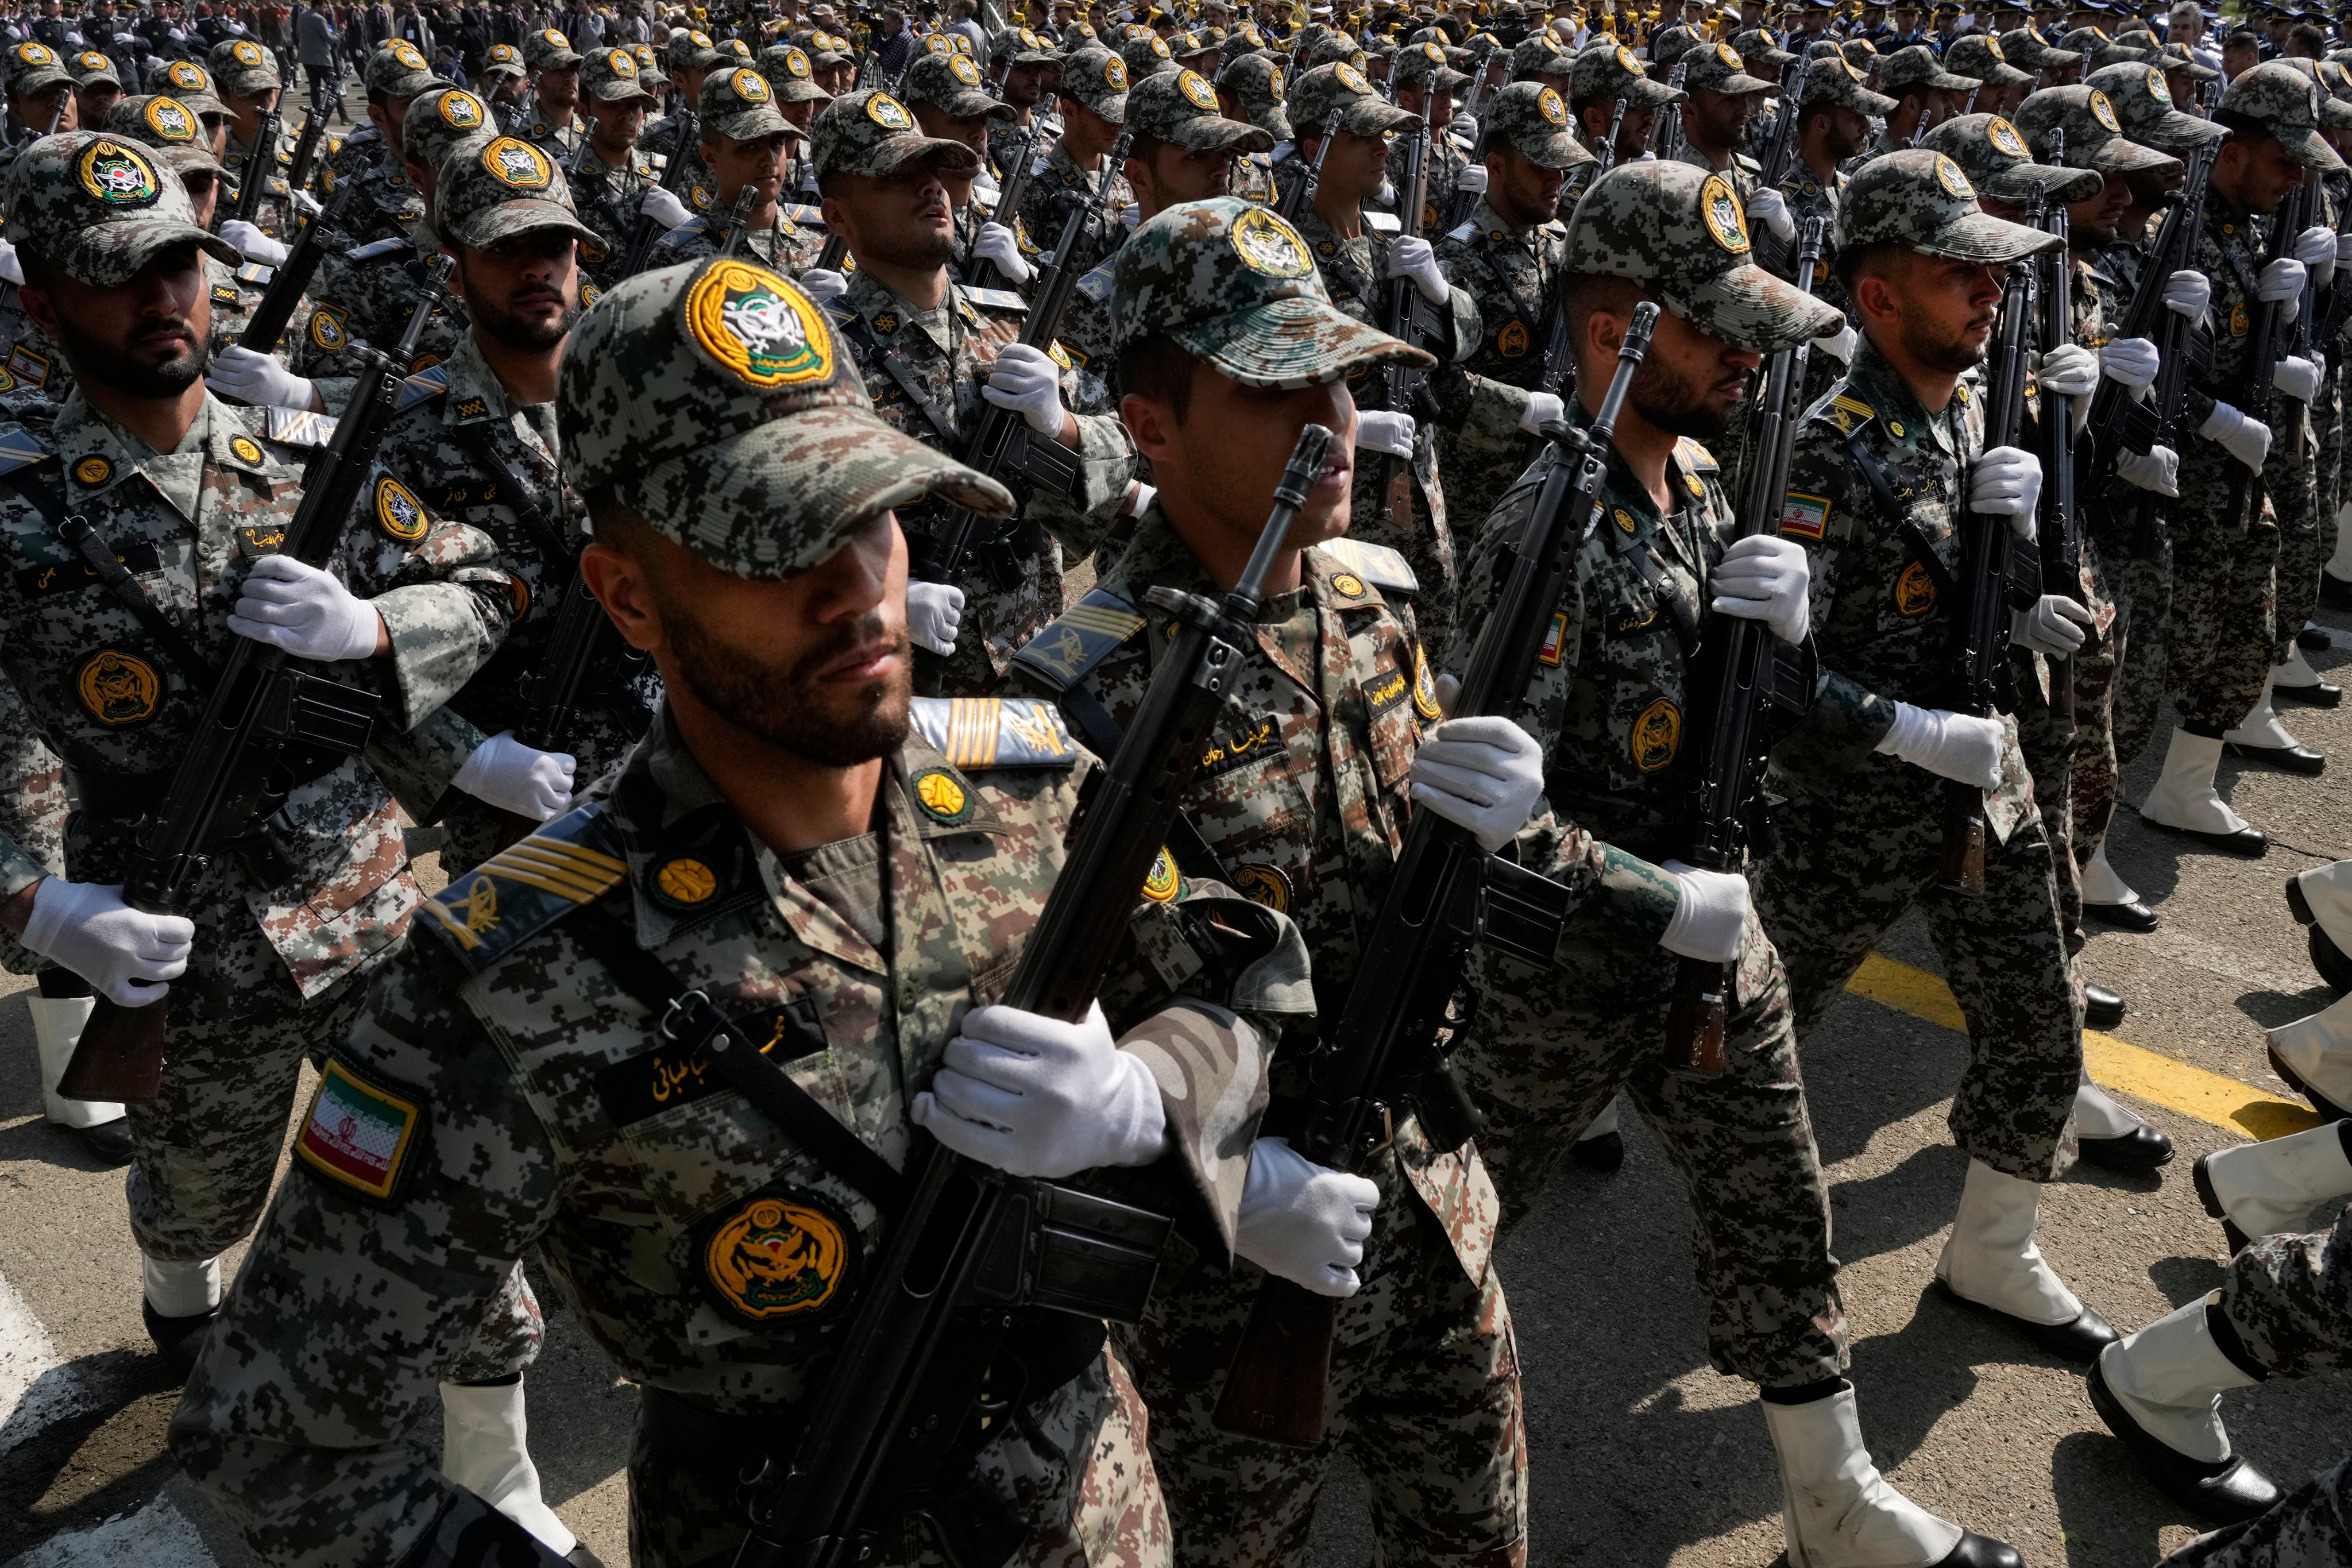 Members of the Iranian military march during an Army Day parade in Tehran on April 17. During the parade, President Ebrahim Raisi said the “tiniest invasion” by Israel would bring a “massive and harsh” response, as the region braces for further escalation. Photo: AP